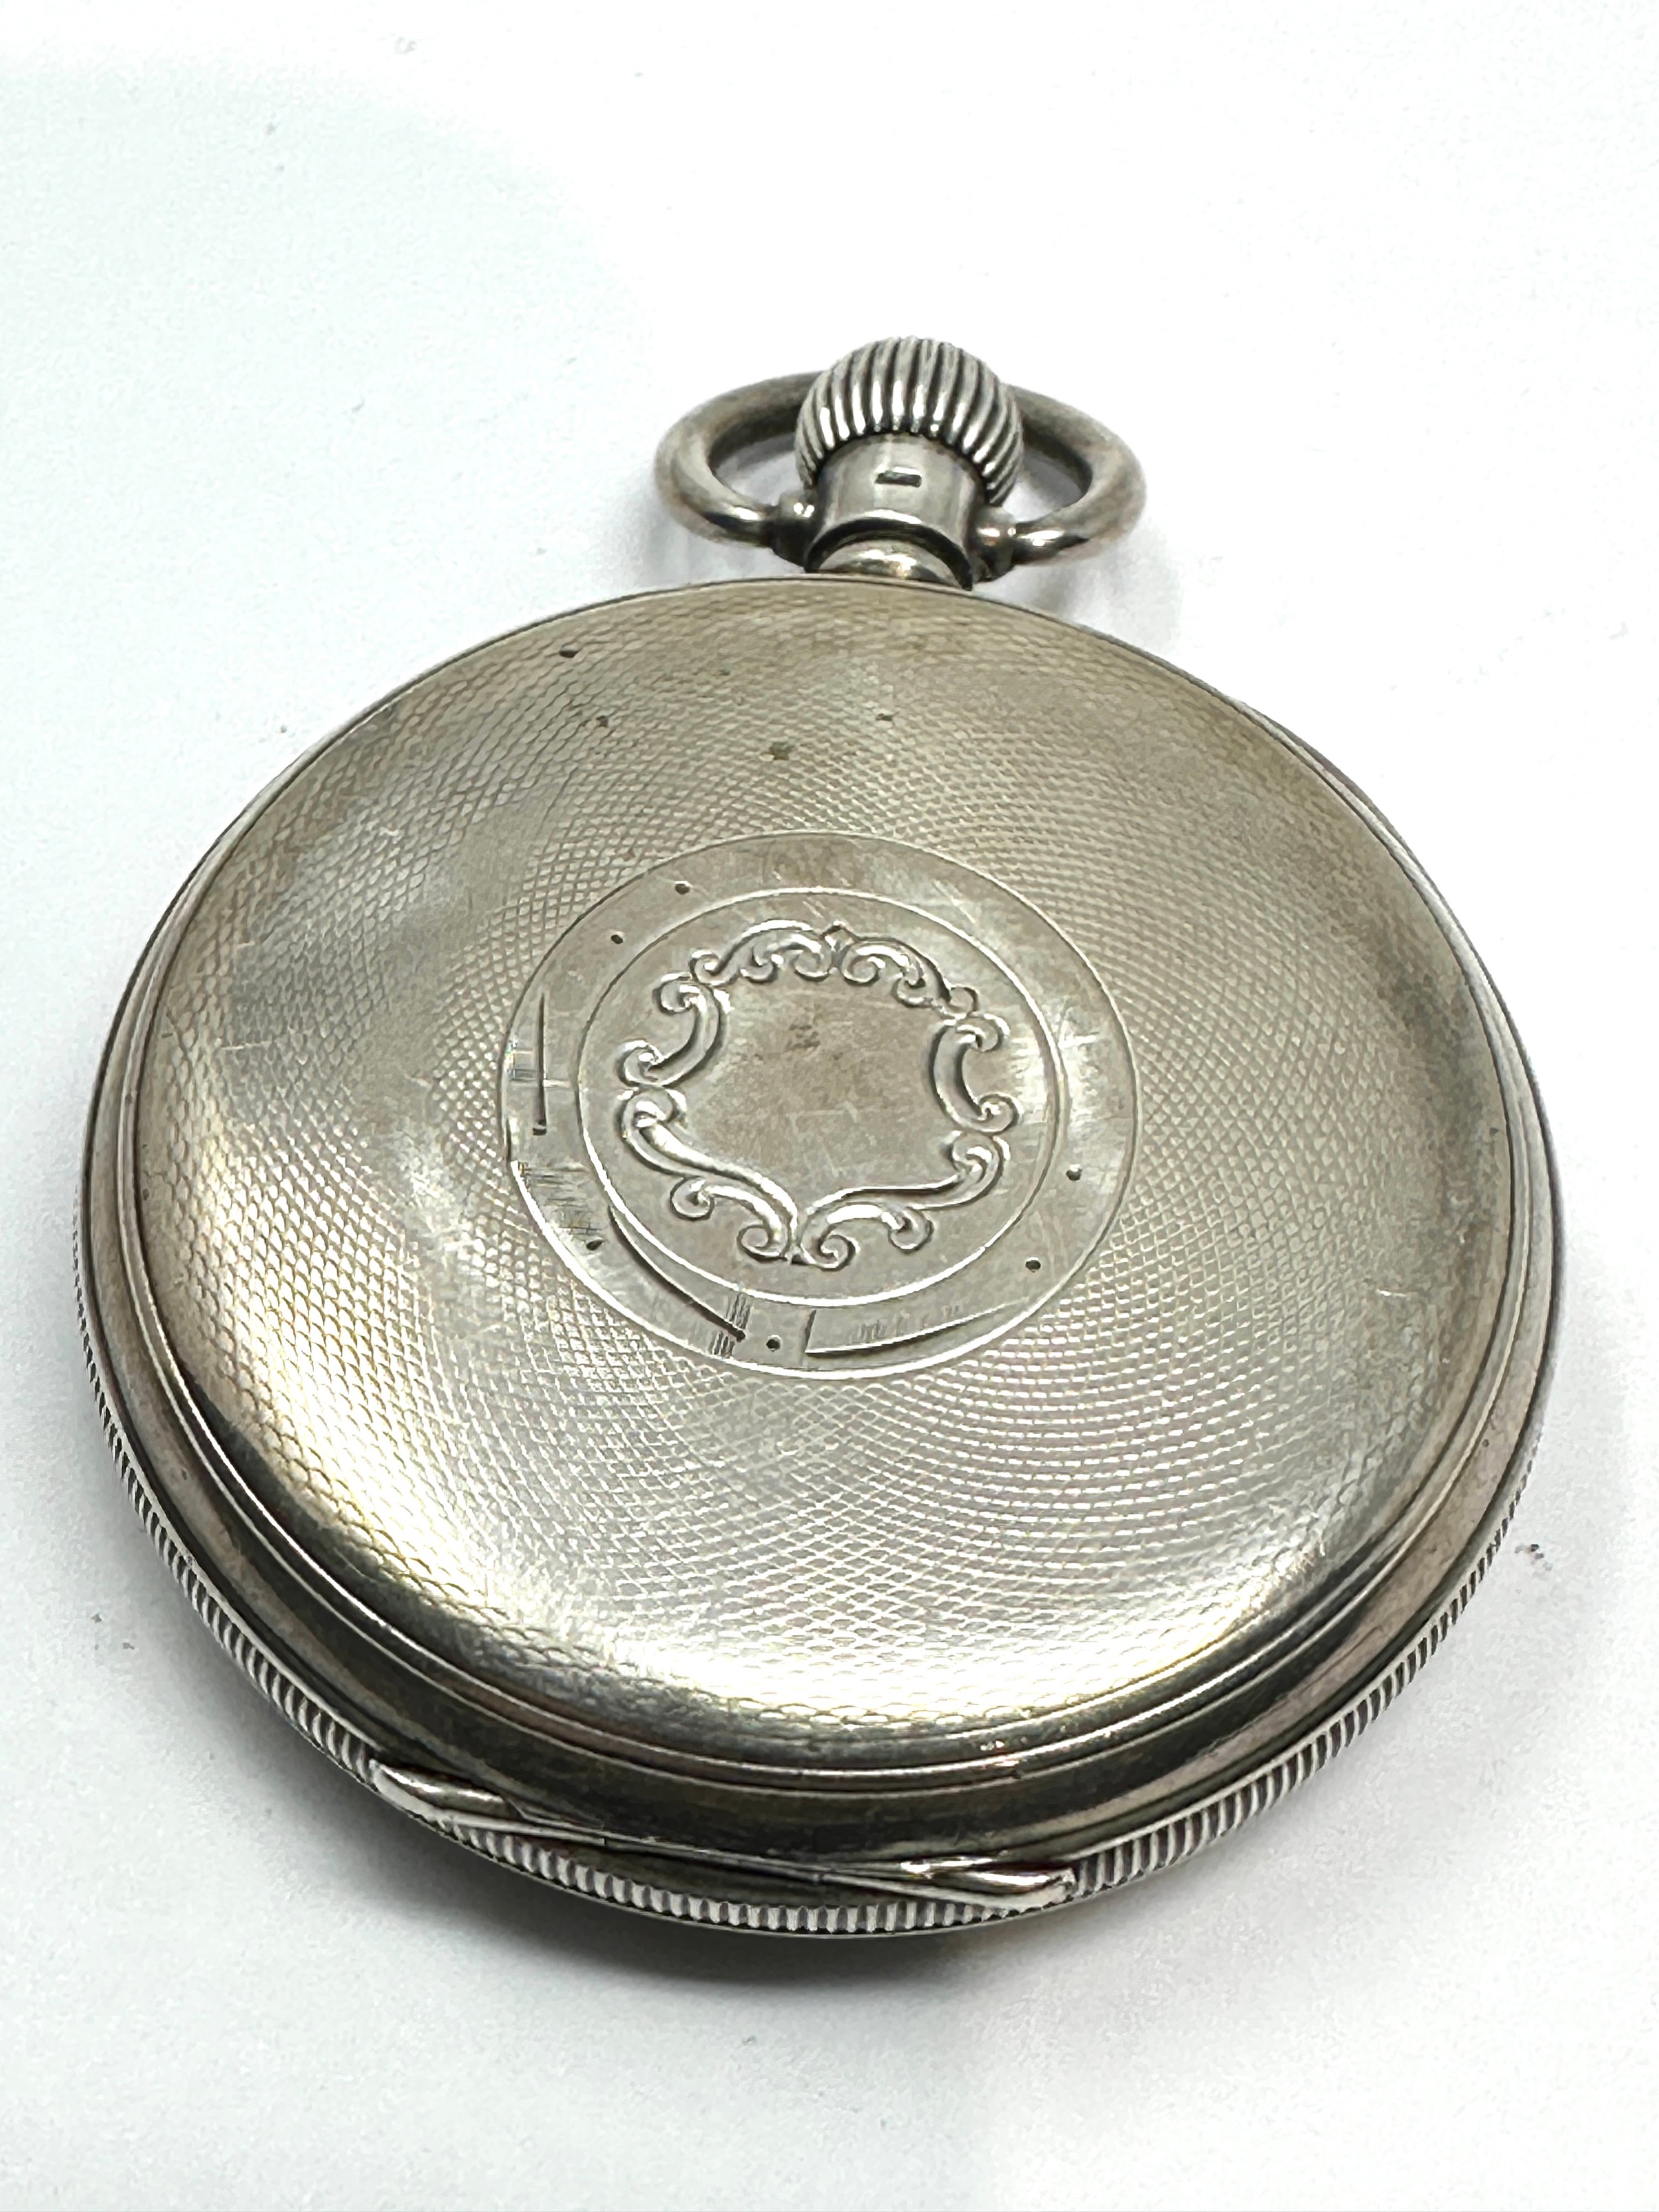 Vintage Gents Sterling Silver Pocket Watch Hand-wind Working - Image 2 of 3